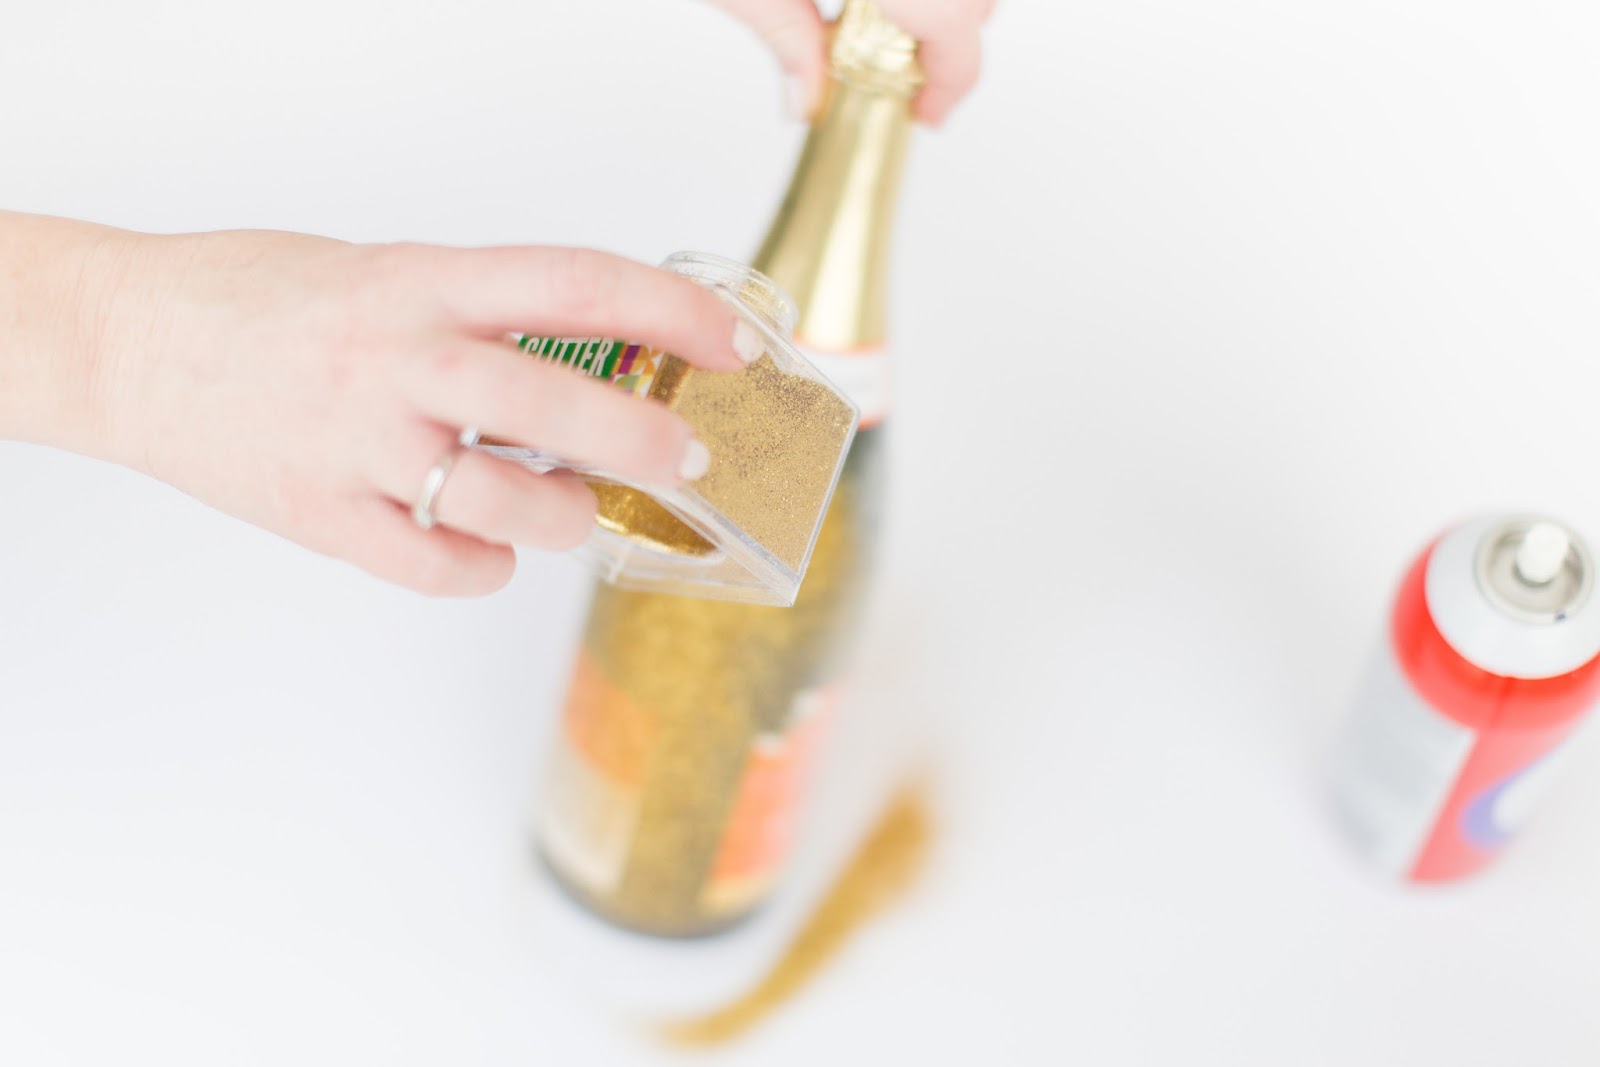 DIY Glitter Champagne Bottle featured by popular party planning blogger, The Celebration Stylist